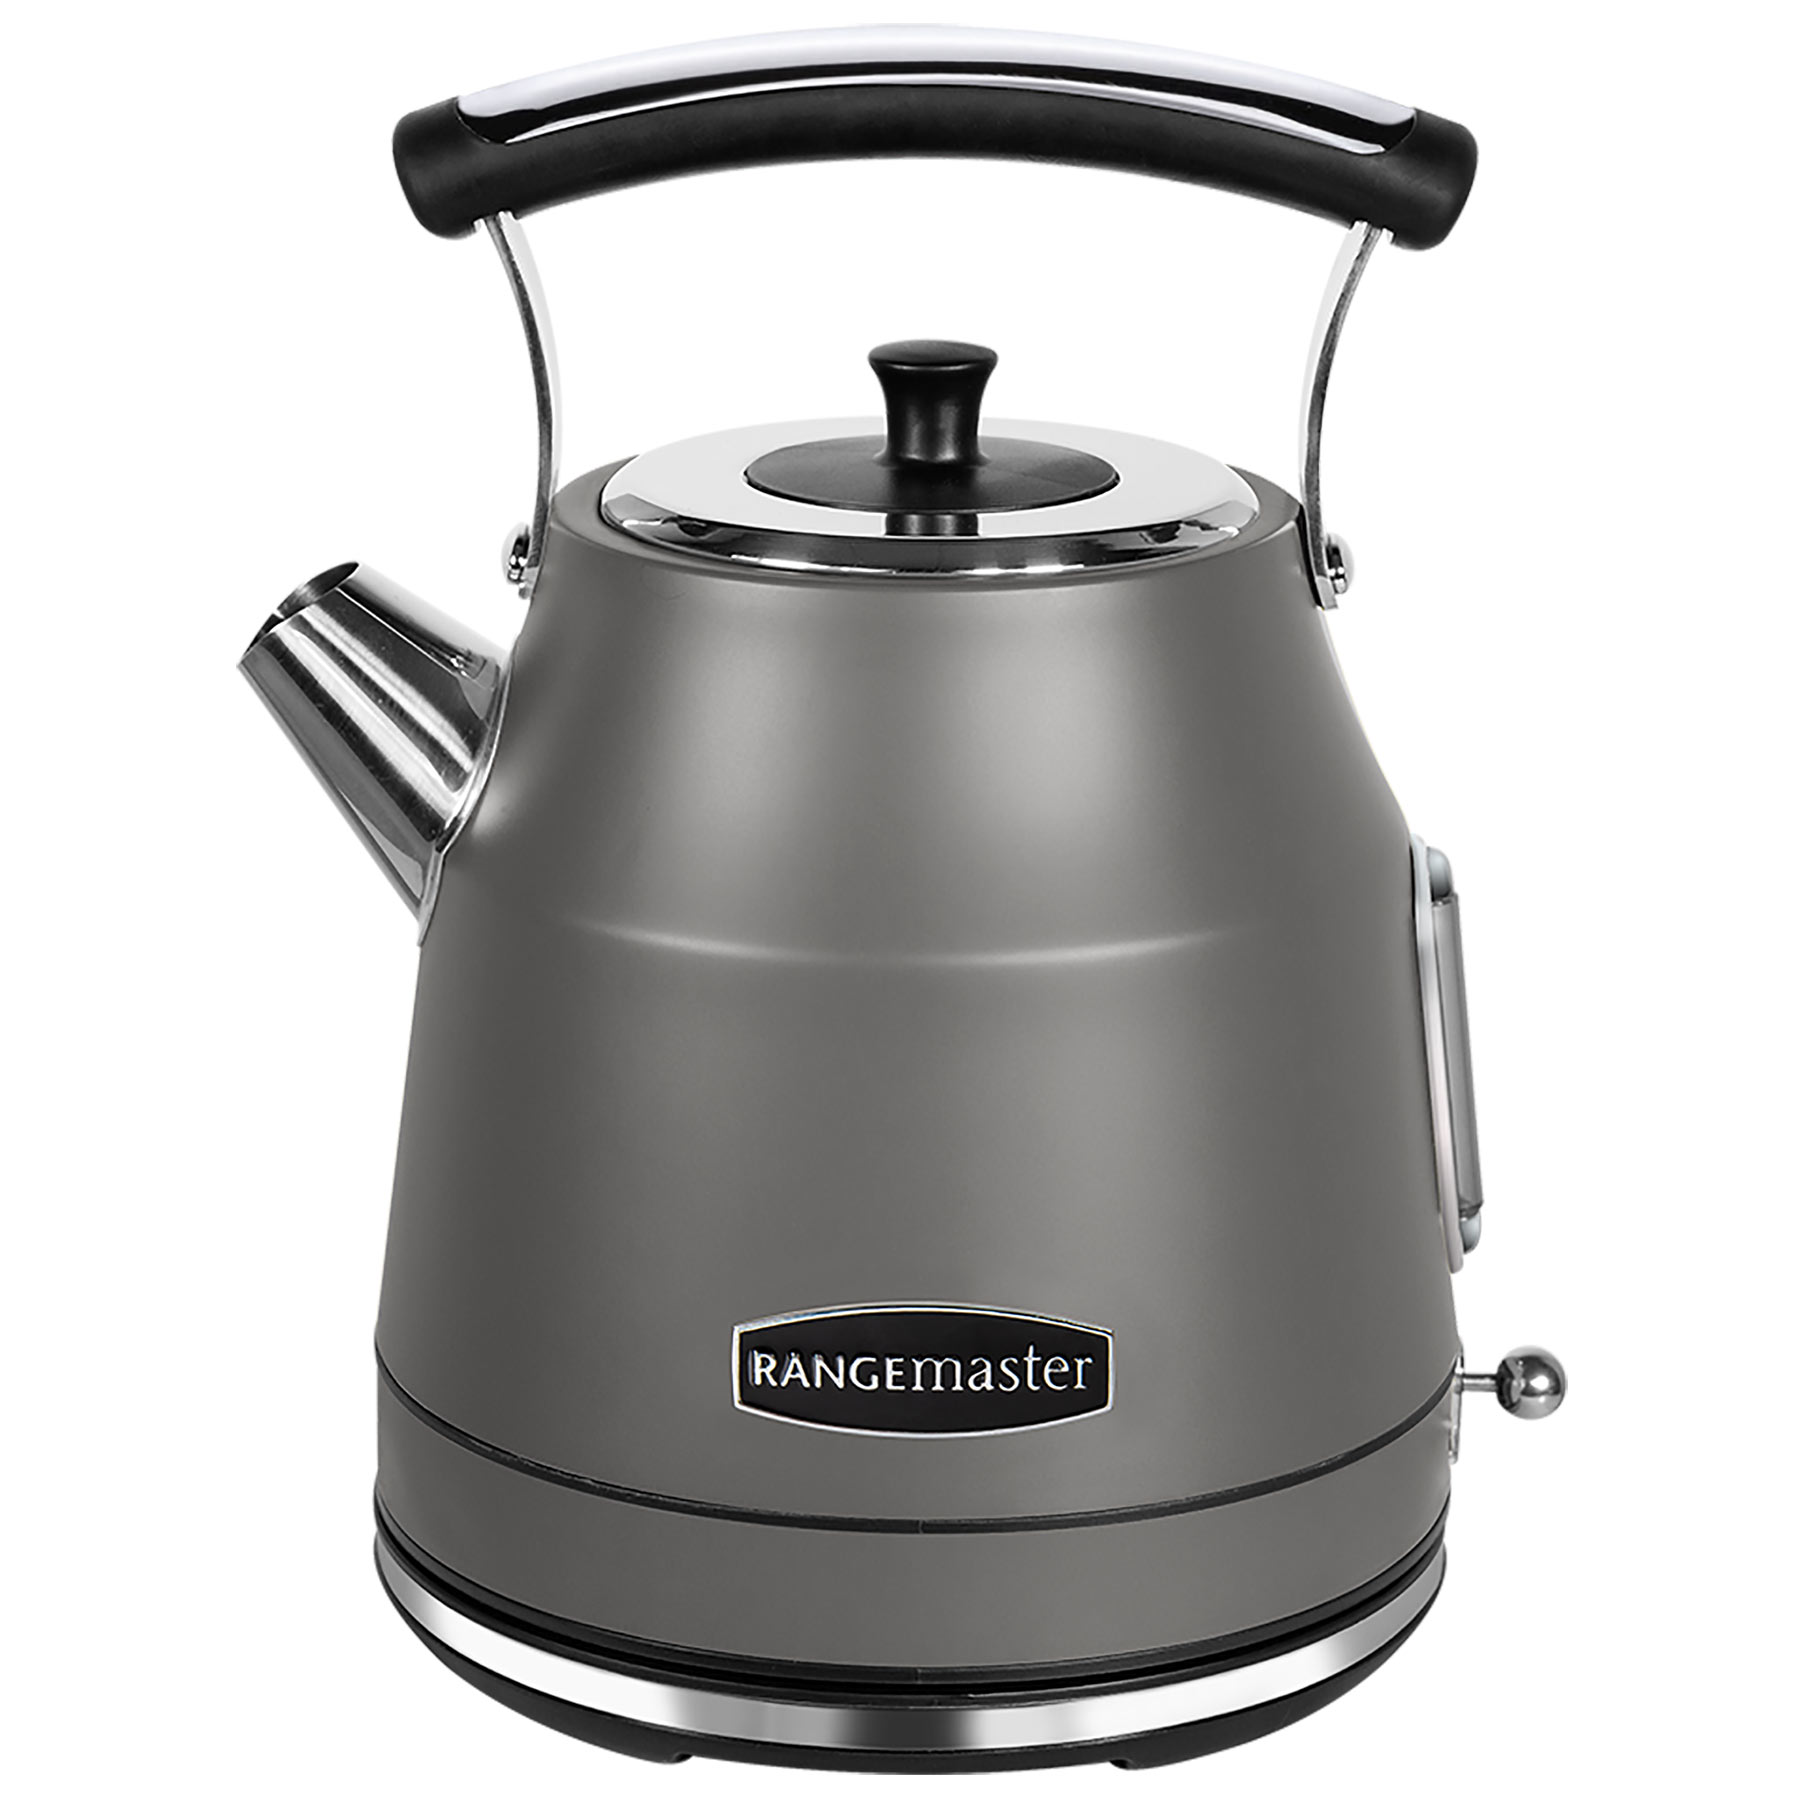 Rangemaster RMCLDK201GY Classic Traditional Cordless Kettle 1 7L in Gr